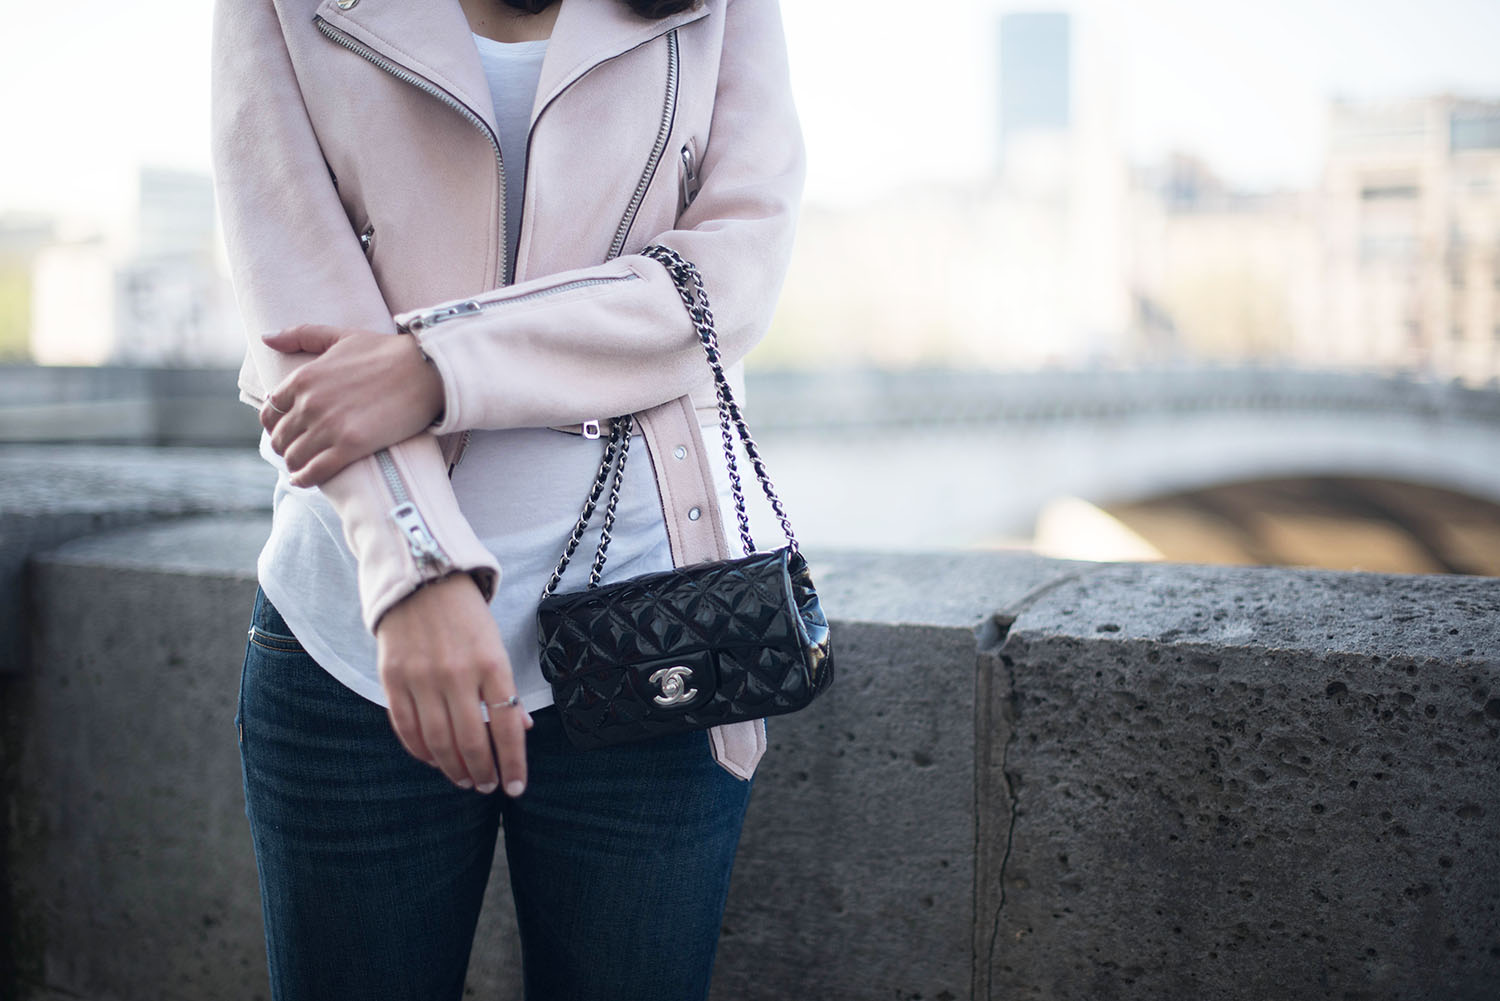 Outfit details on style blogger Coco & Vera, featuring a black Chanel extra mini handbag